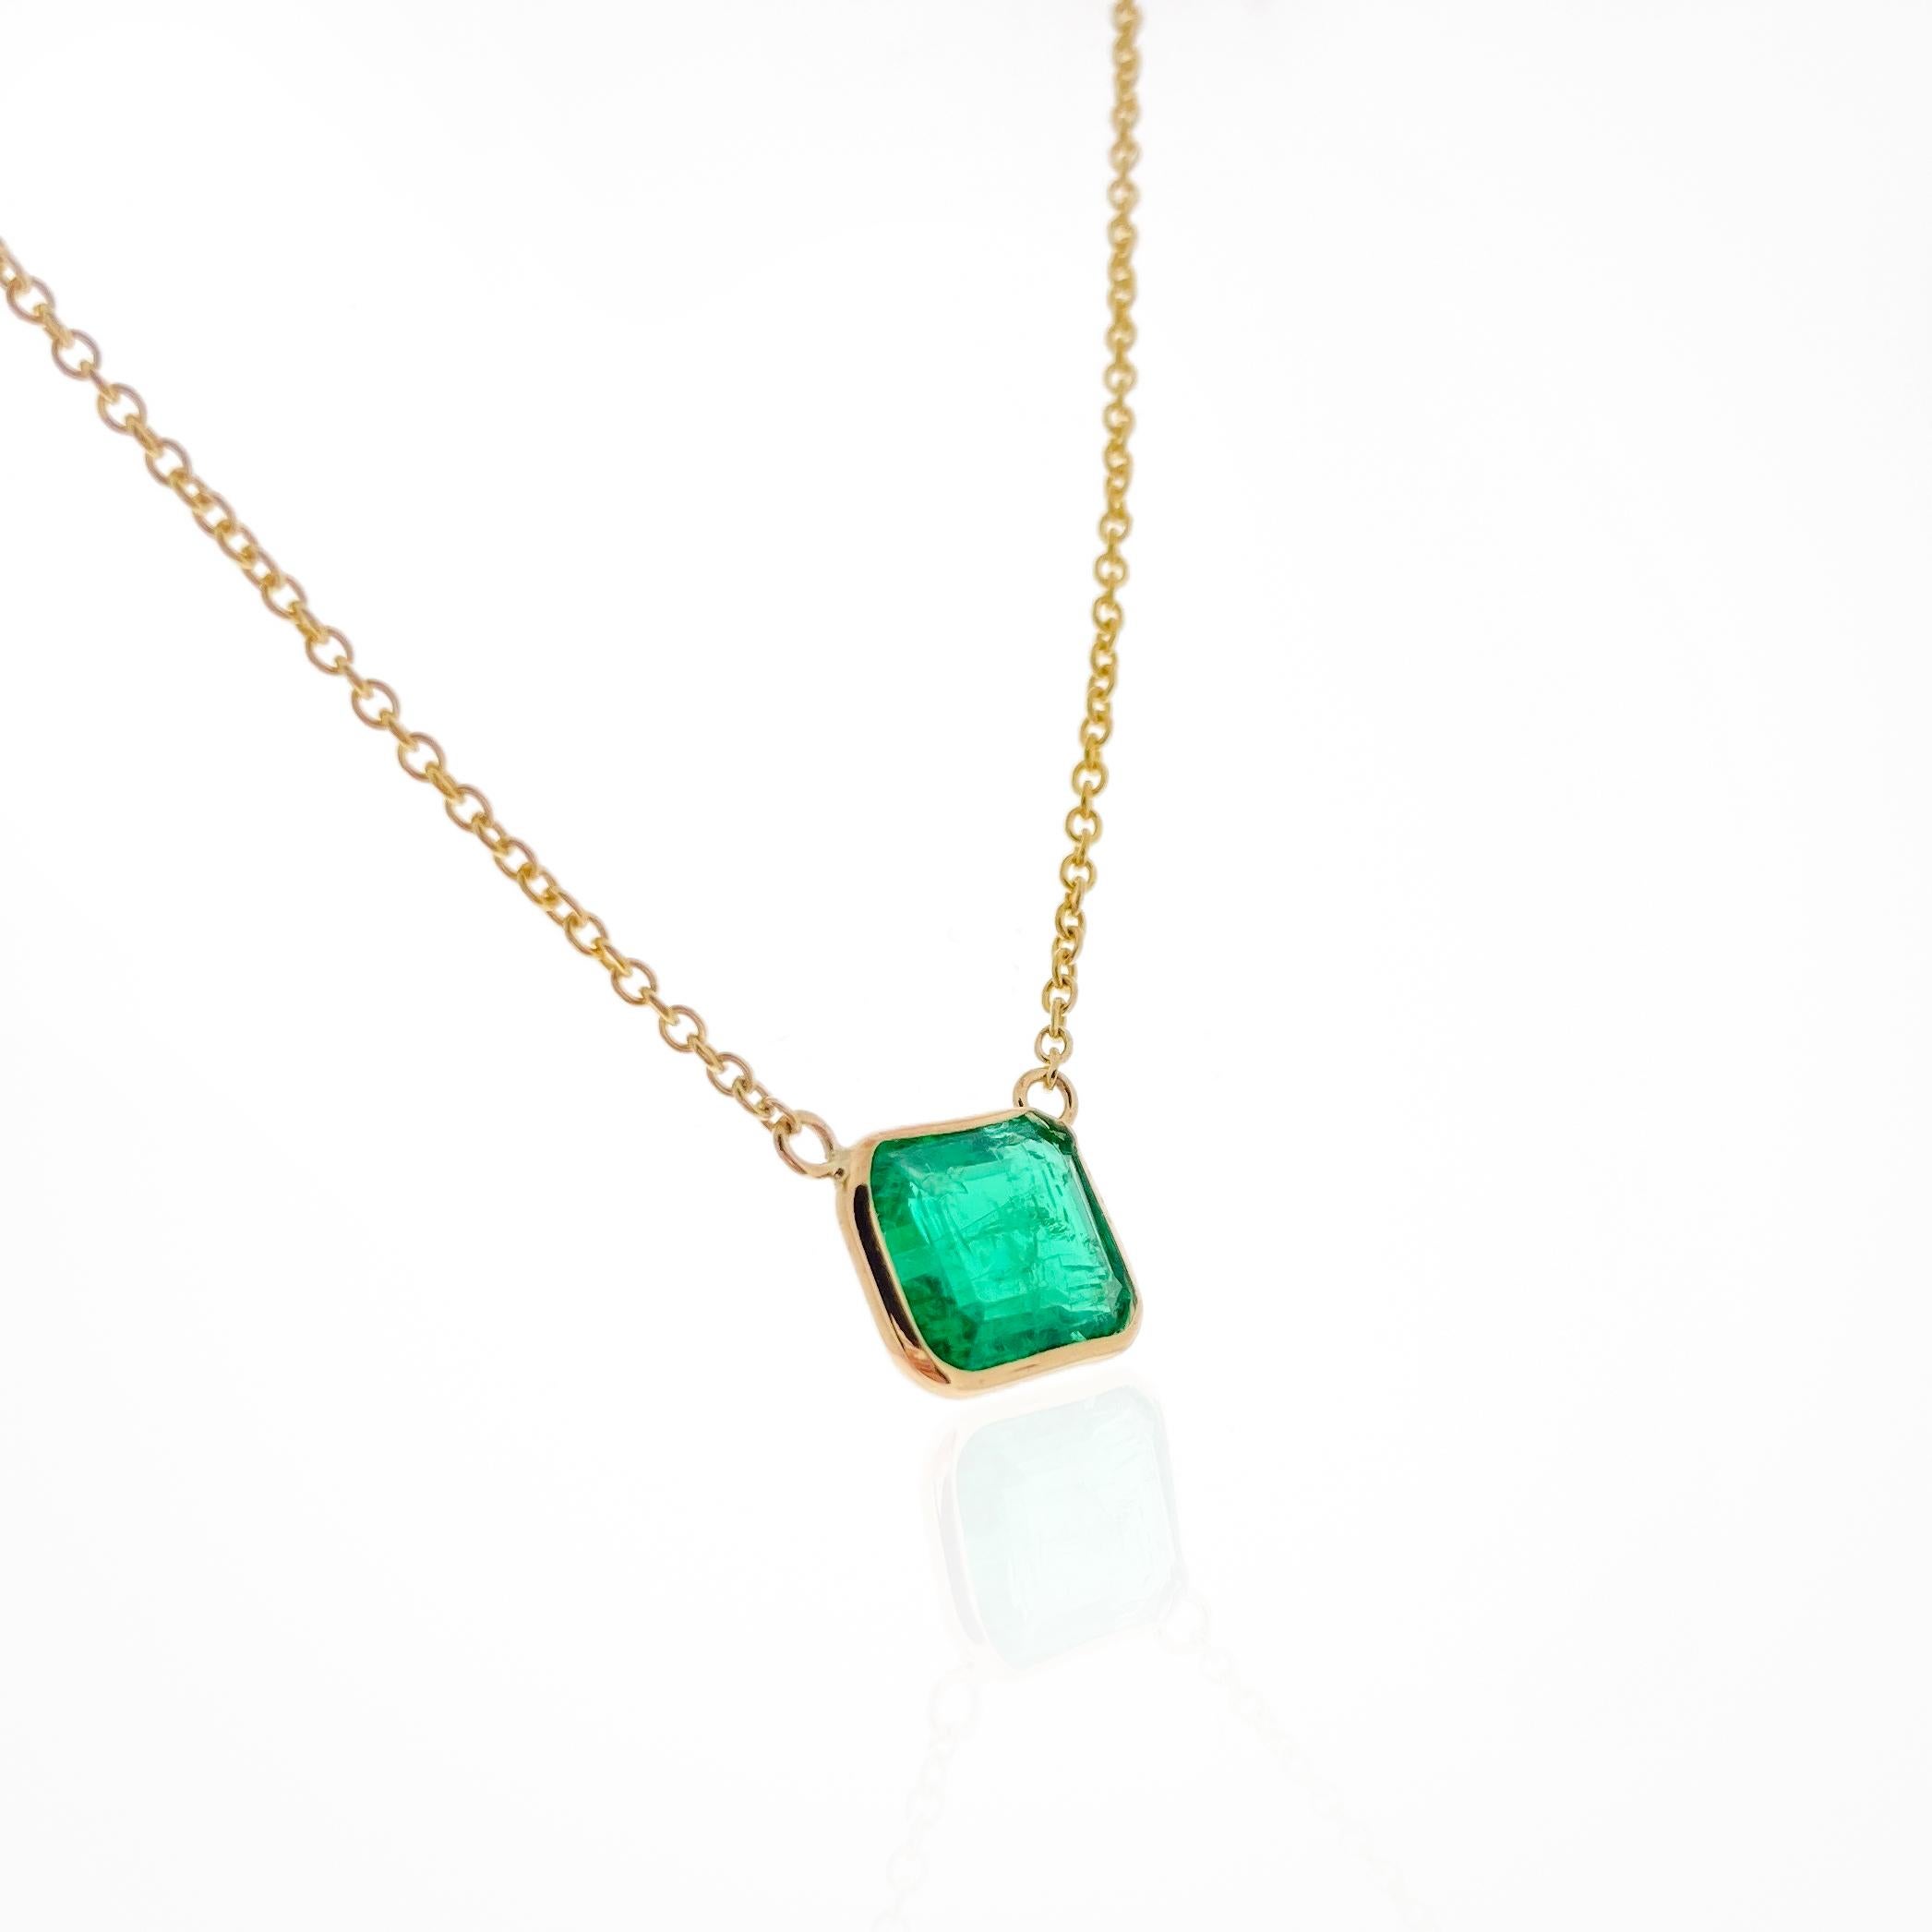 This necklace features an emerald-cut green emerald with a weight of 1.76 carats, set in 14k yellow gold (YG). Emeralds are known for their stunning green color, and an emerald cut accentuates the gem's natural beauty with its rectangular or square